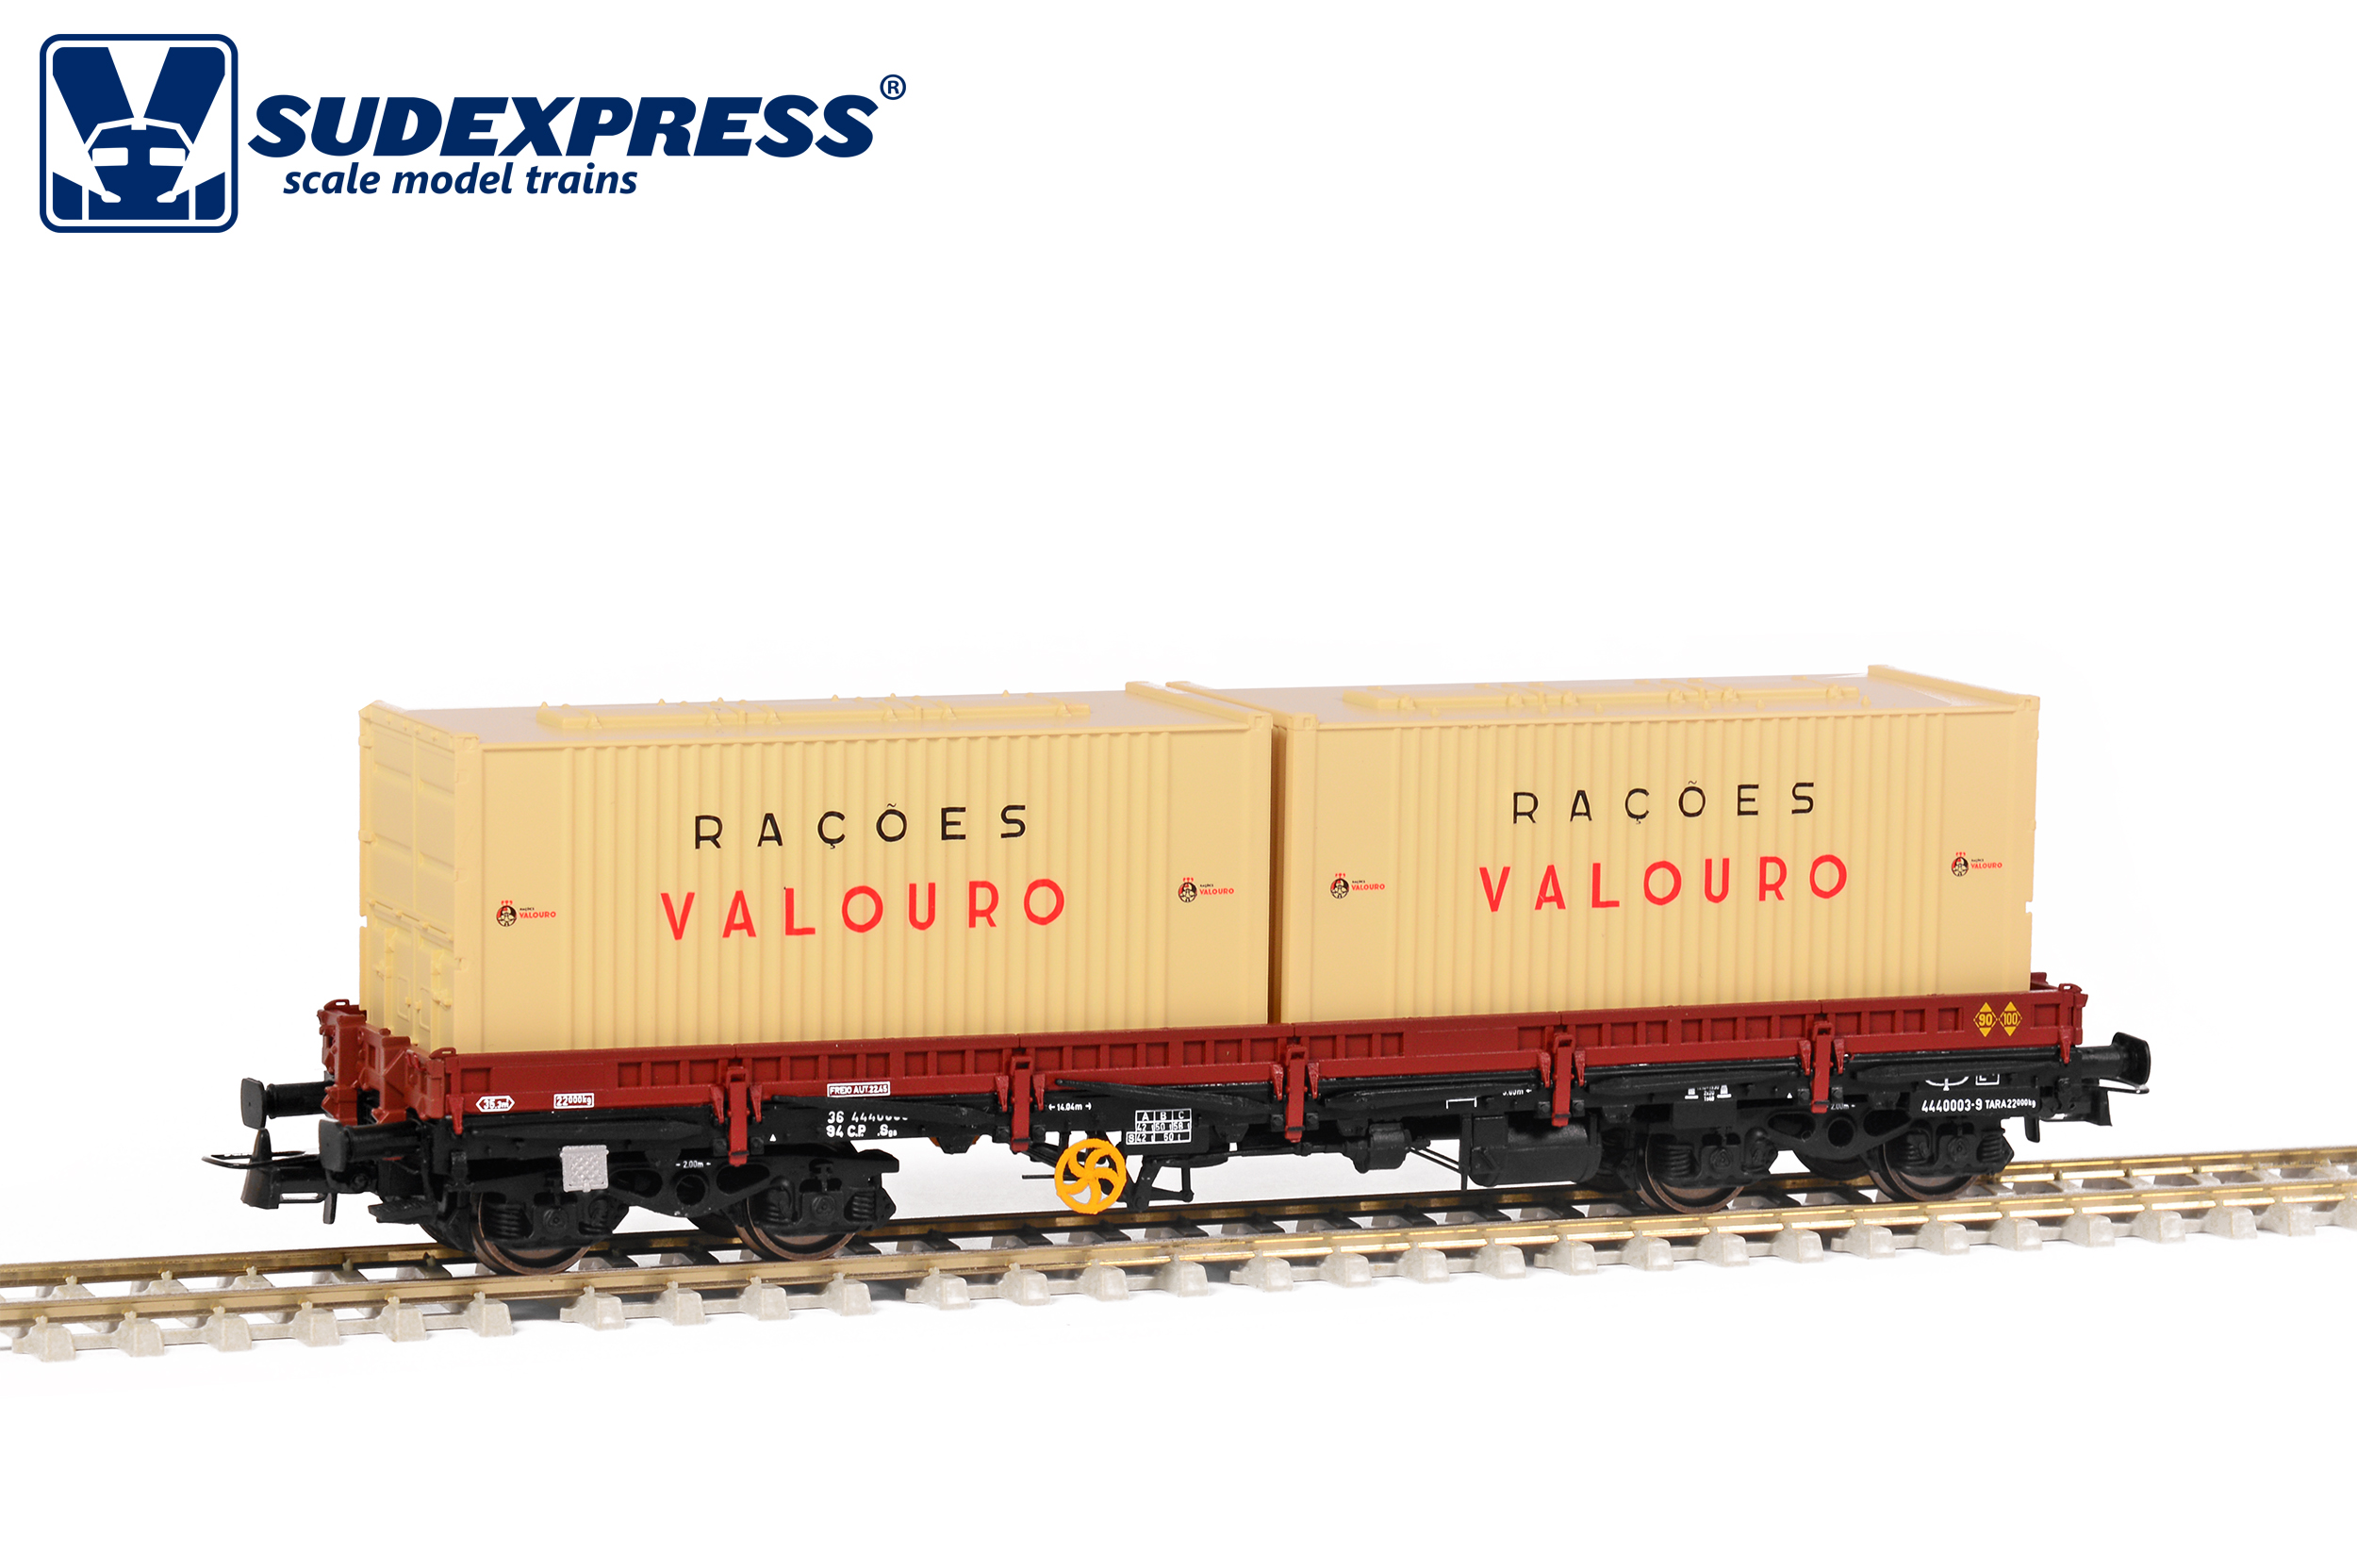 Cp Lyv Sudexpress Scale Model Trains